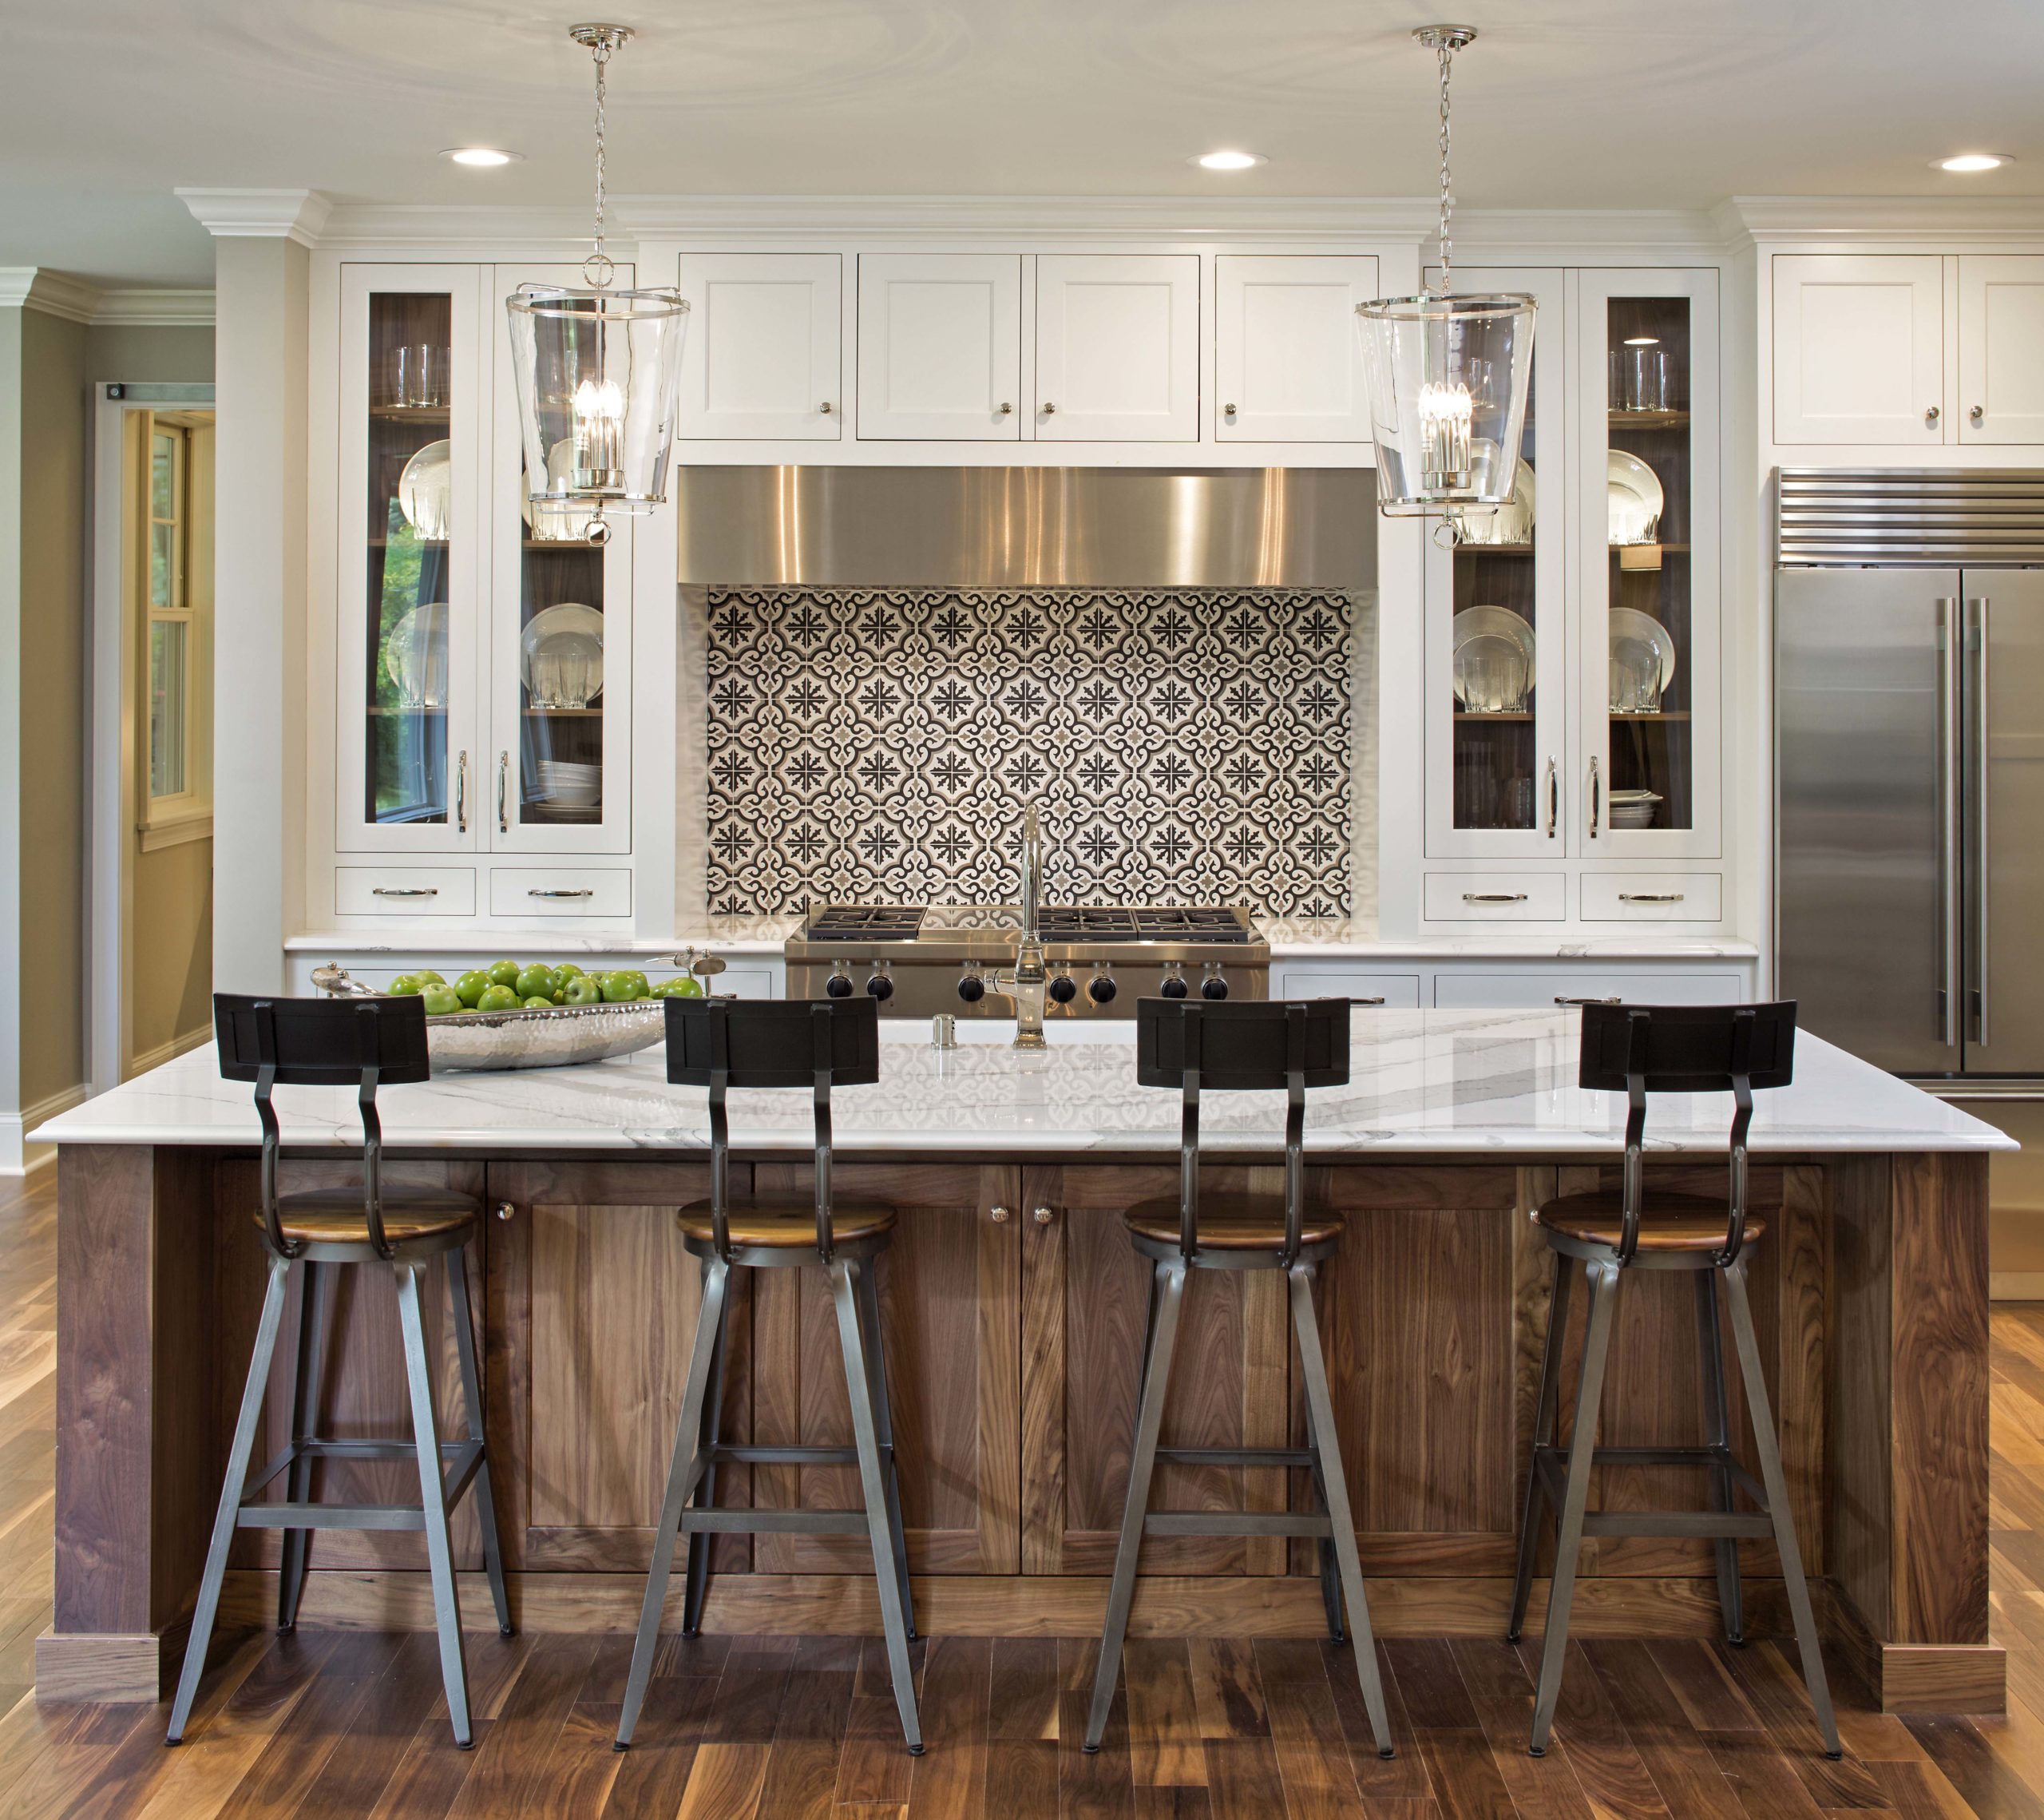 A kitchen with a center island and bar stools.